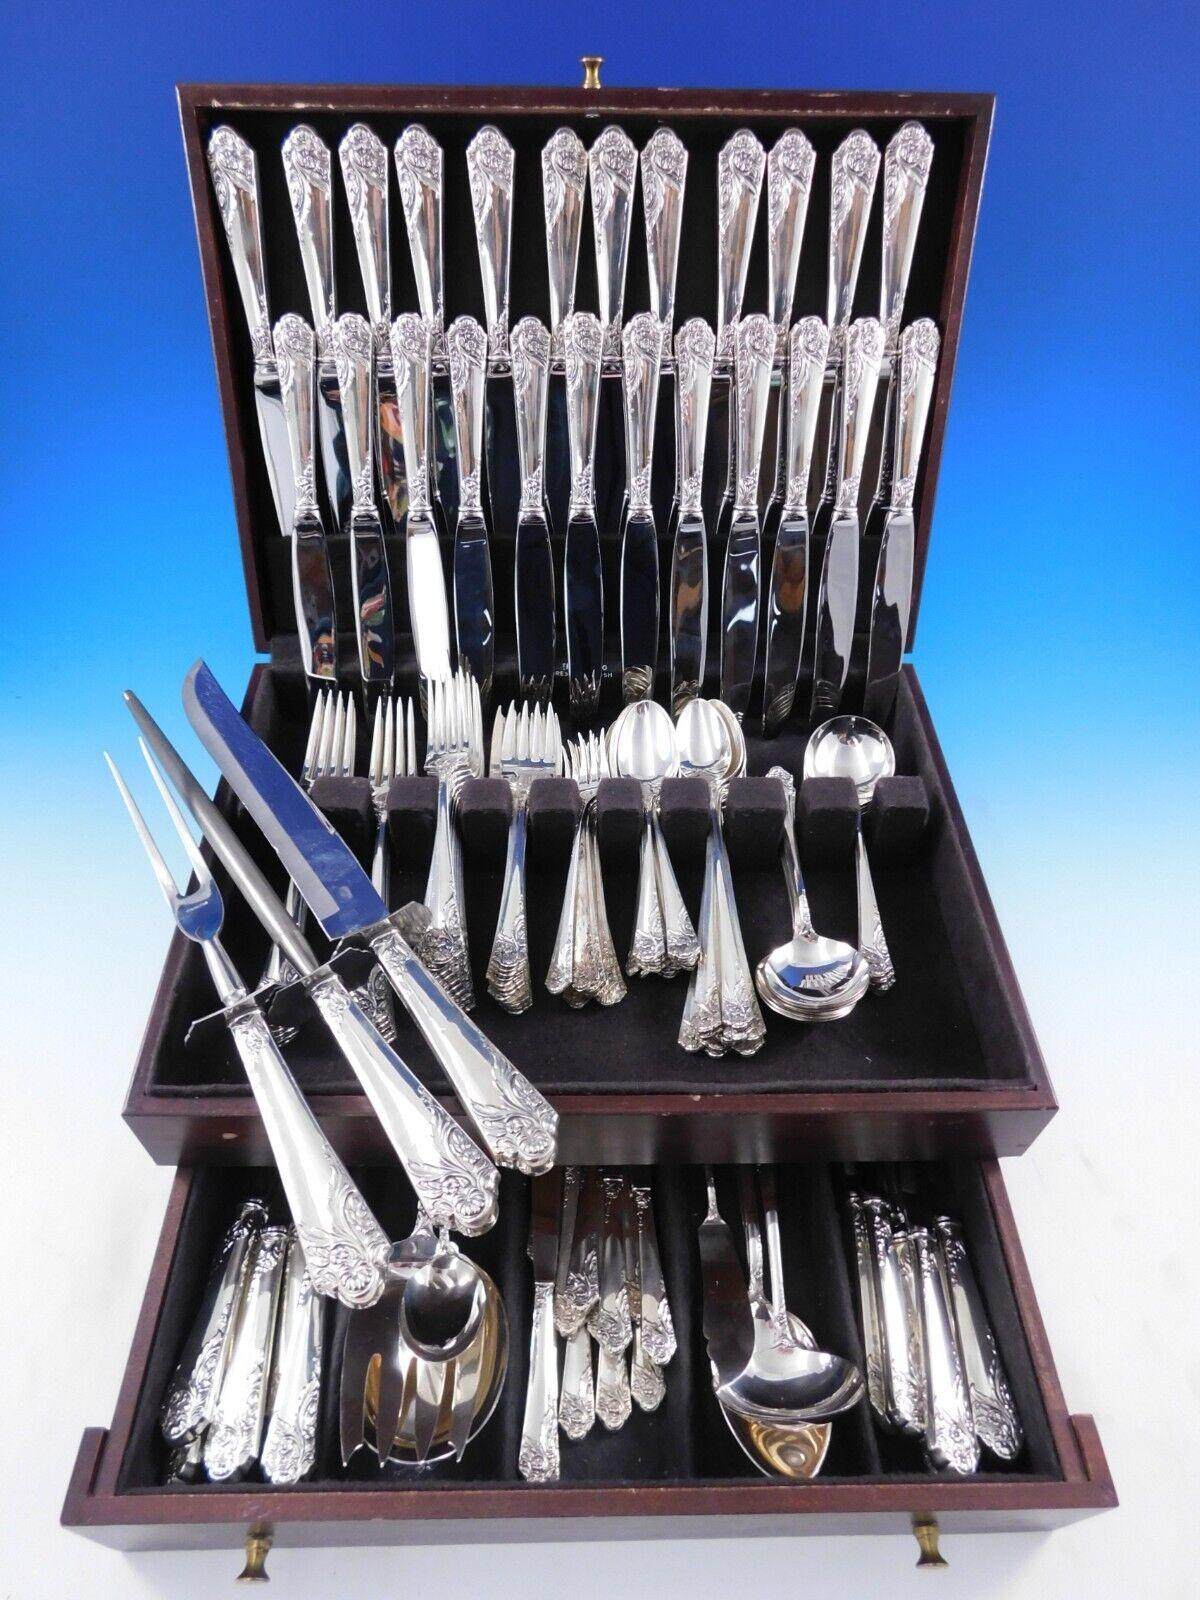 Monumental Dinner and luncheon size Ecstasy by Amston c1951 Sterling silver Flatware set with a sweeping floral design, 142 pieces. This set includes:

12 Dinner Size Knives, 9 5/8